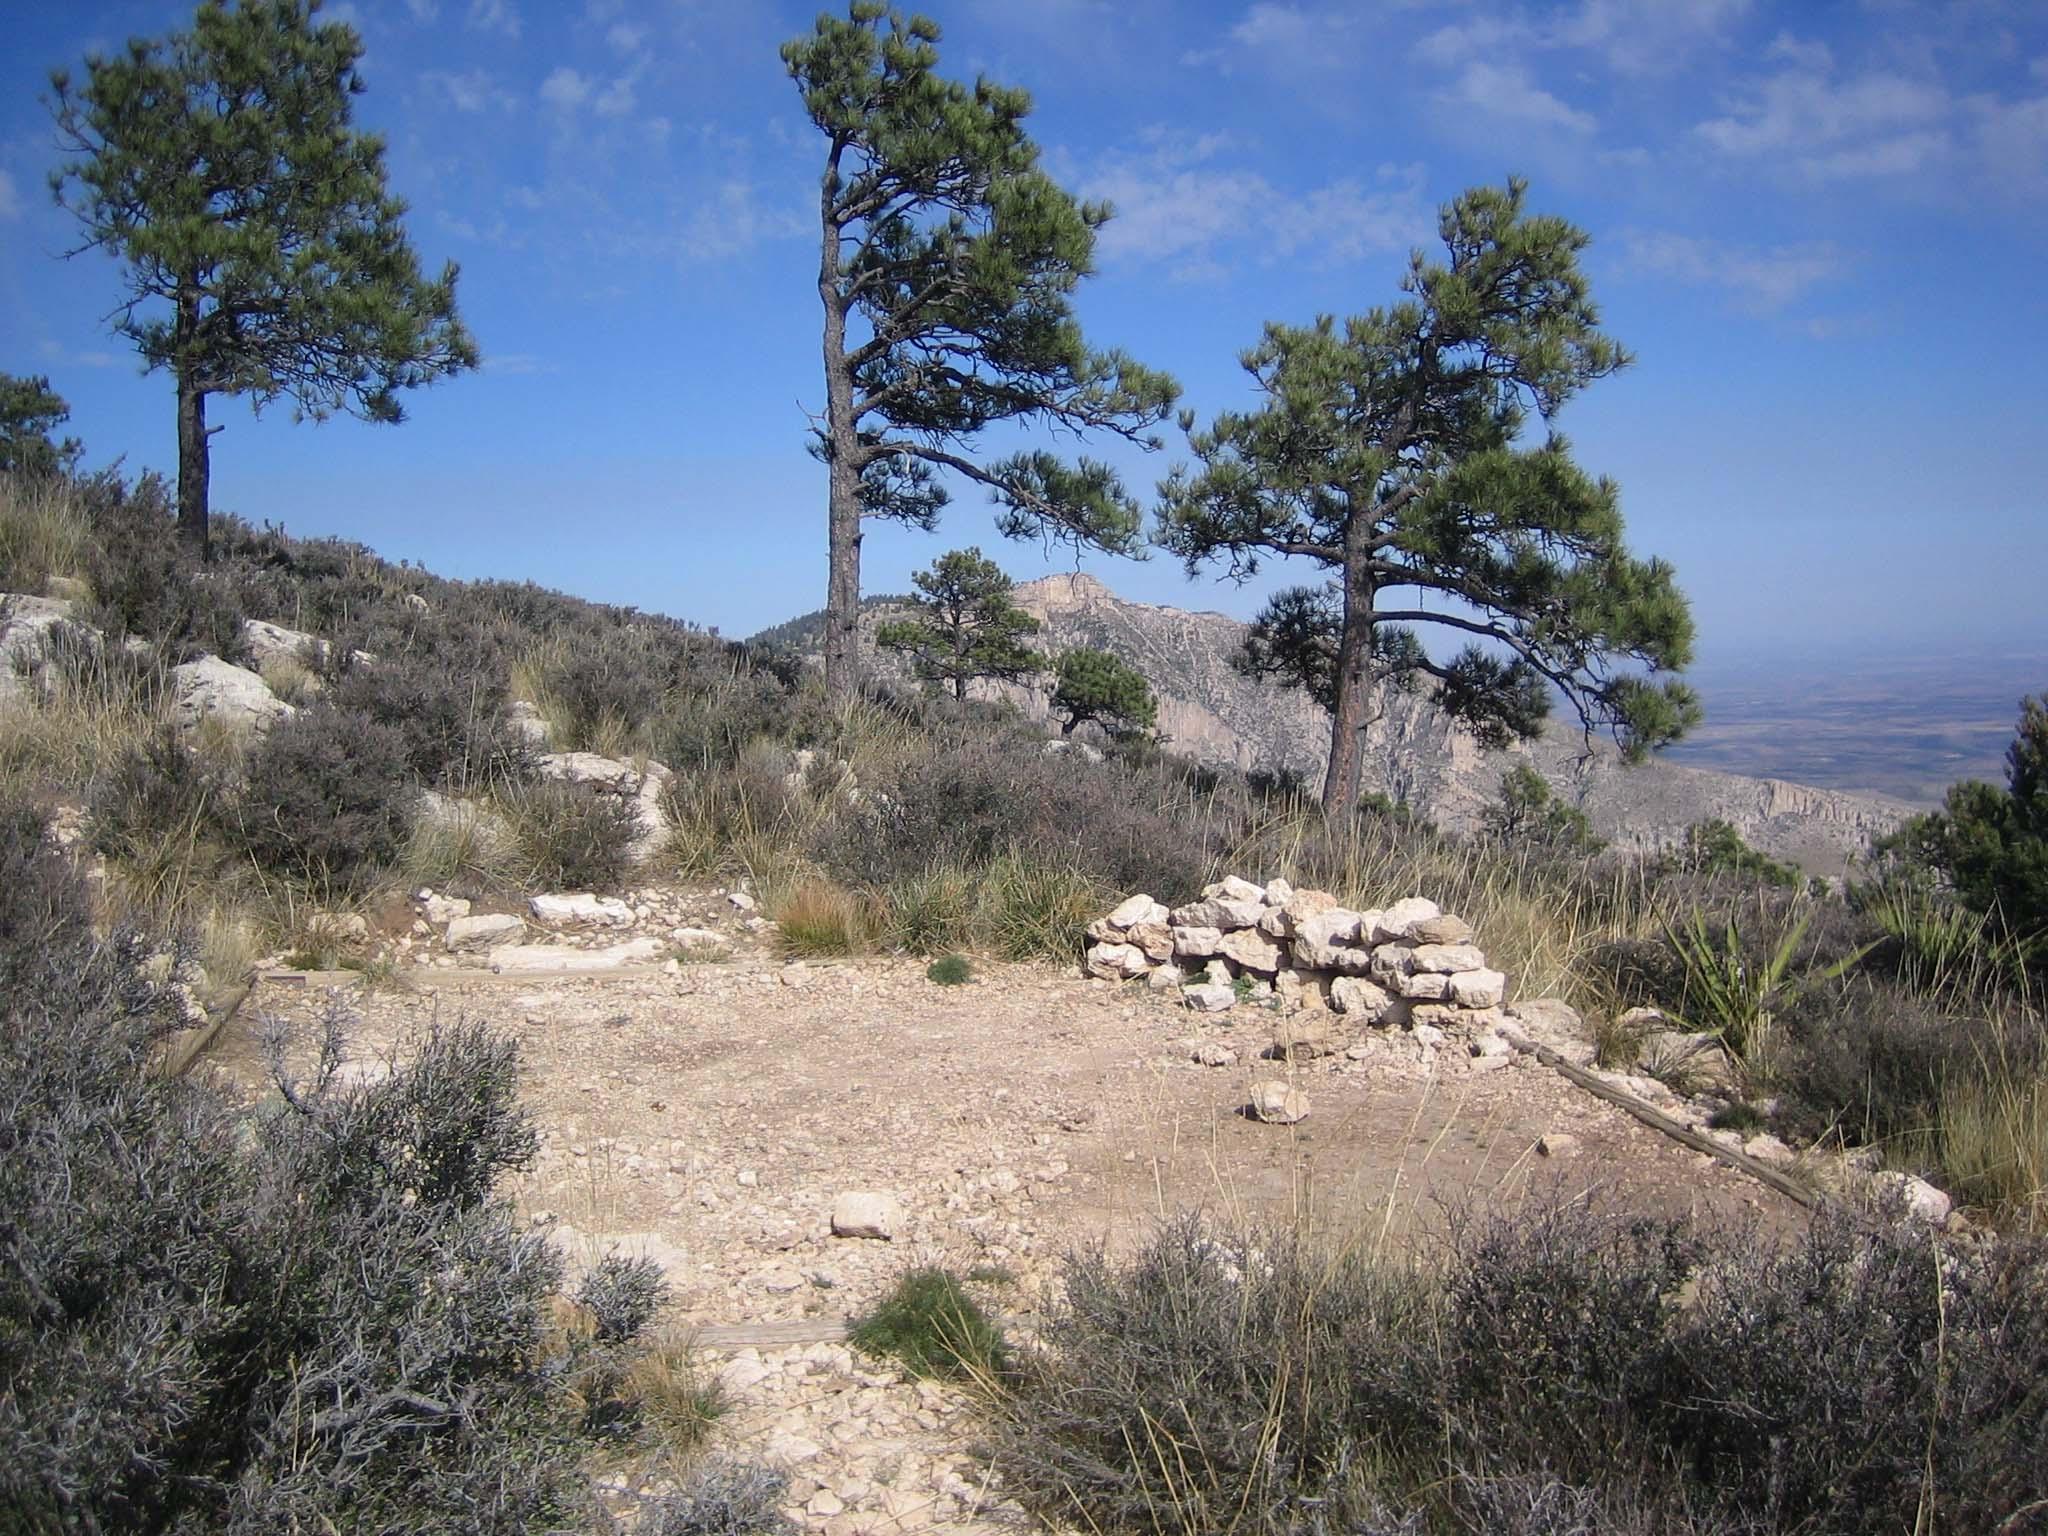 A hardened pad for a tent in a sparse mountain landscape with few trees